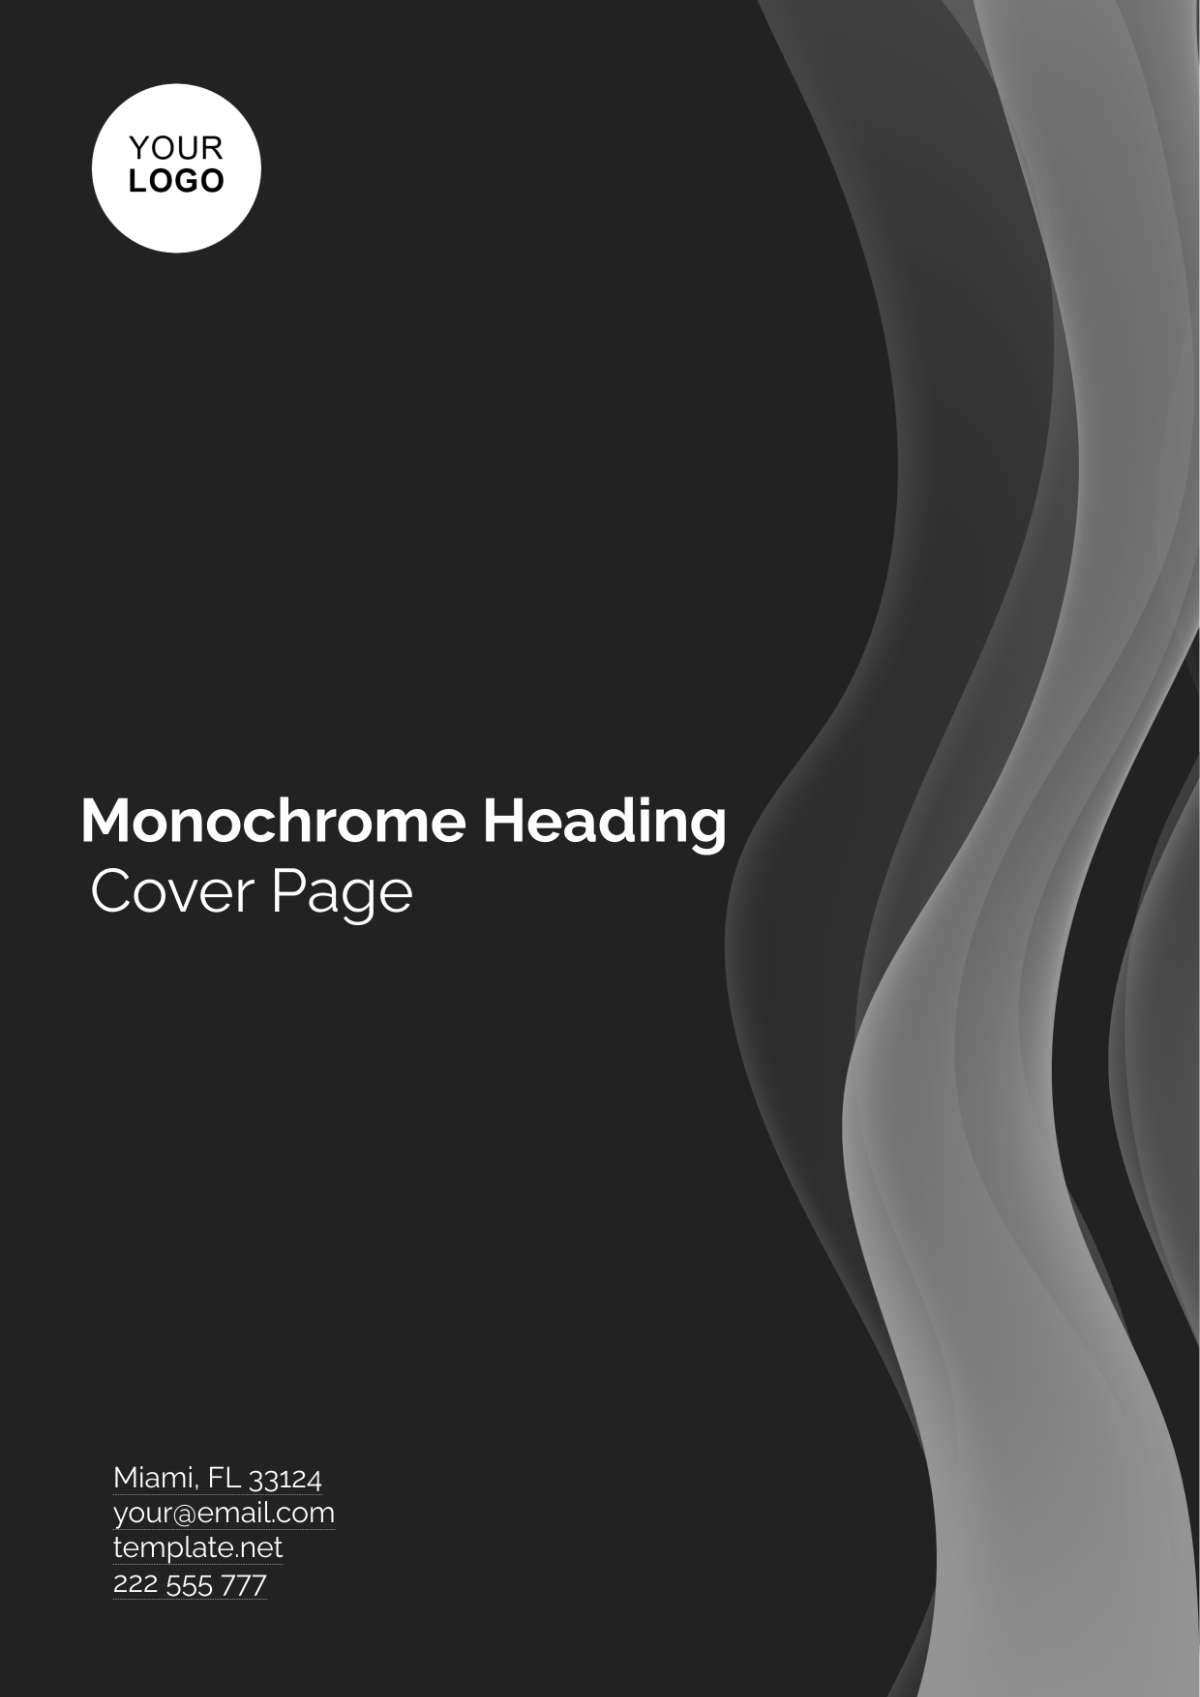 Free Monochrome Heading Cover Page Template